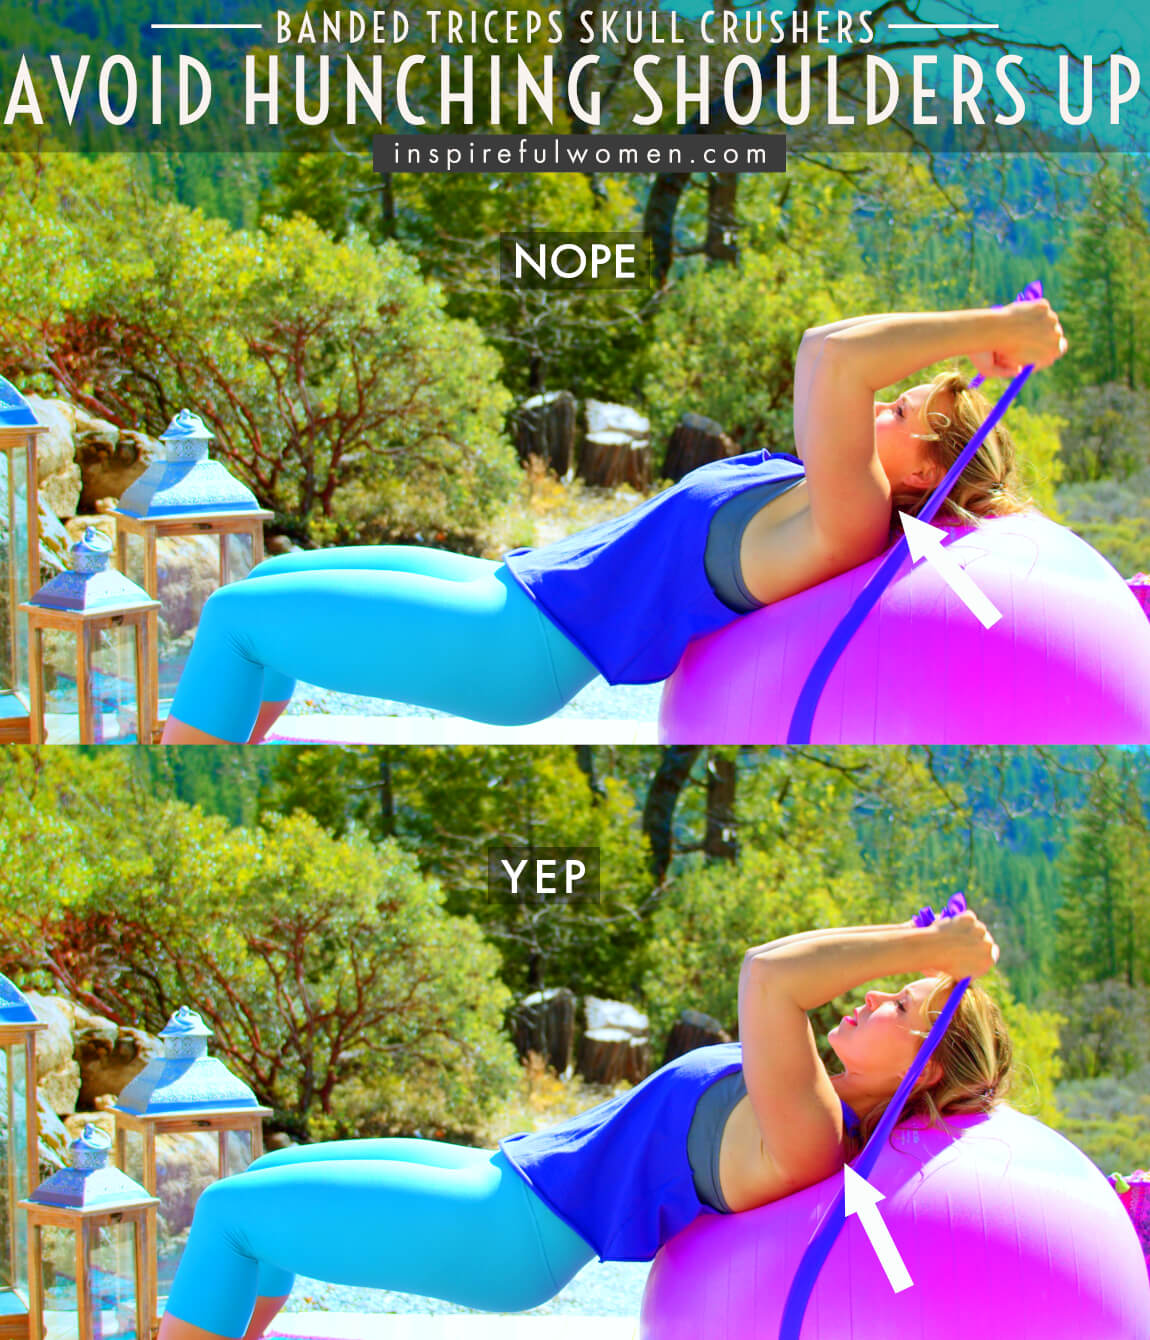 avoid-hunching-shoulders-up-resistance-band-triceps-skull-crushers-exercise-proper-form